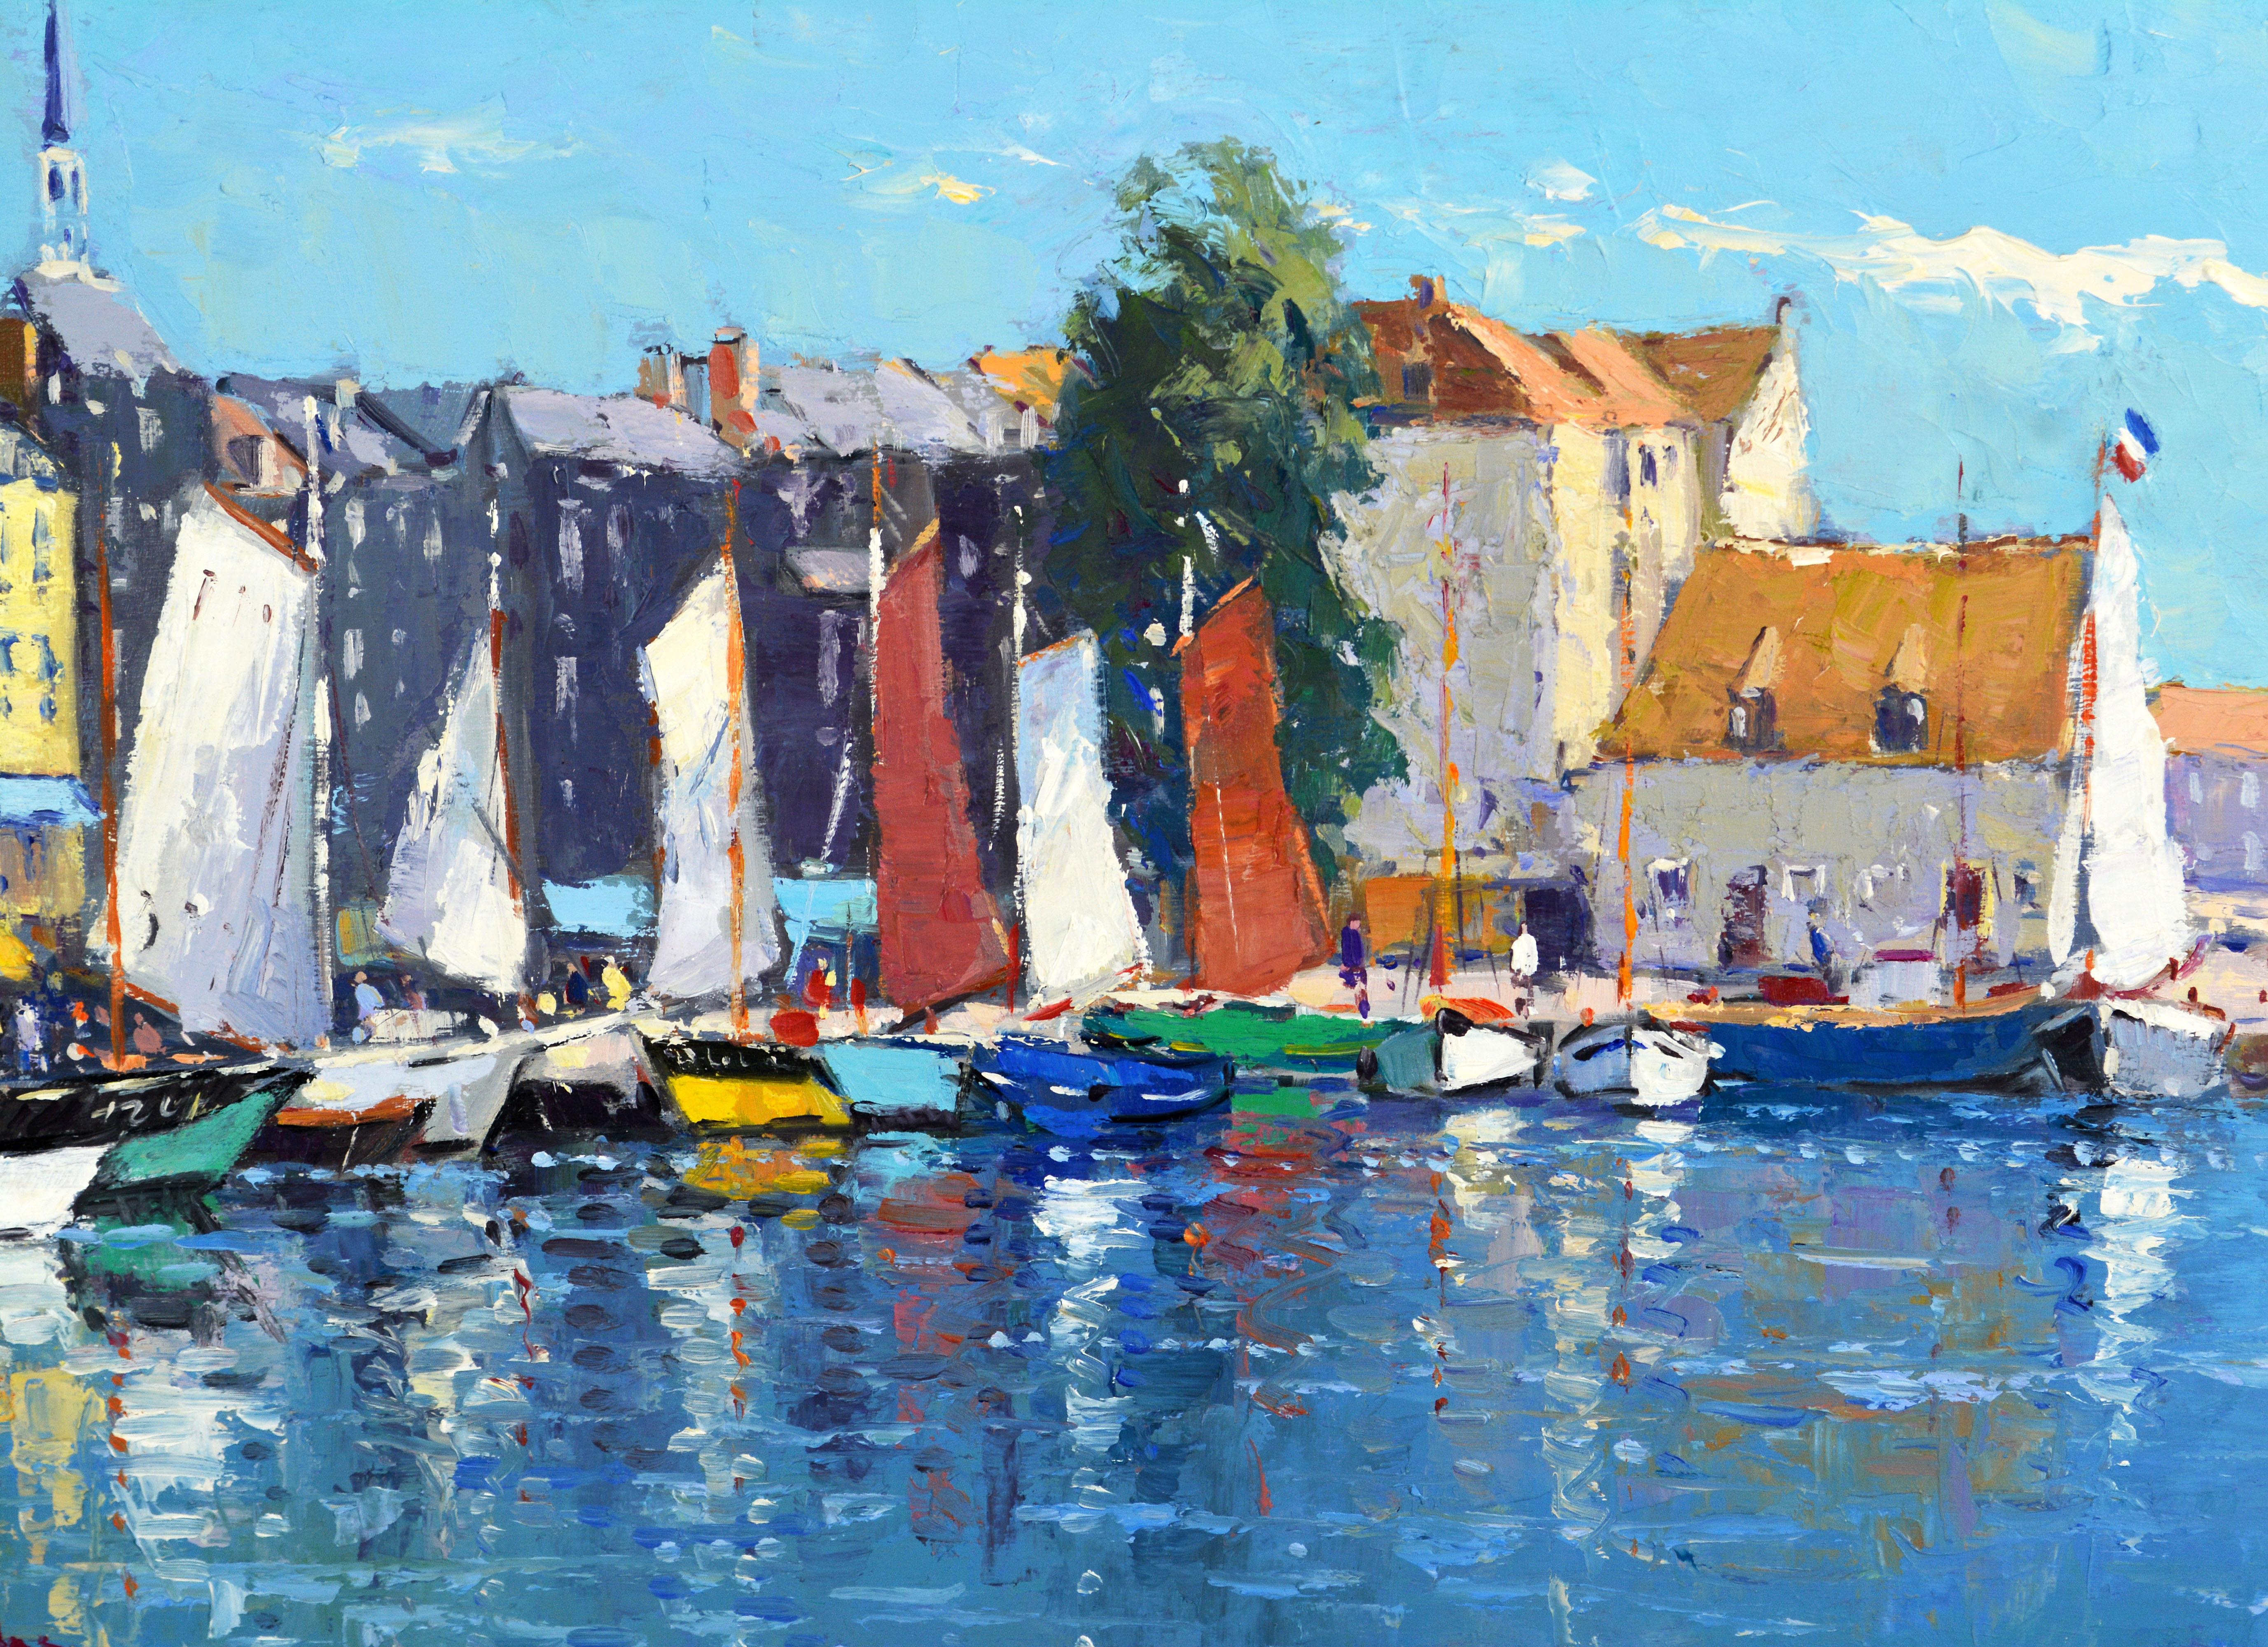 'Honfleur Harbor, Normandy'
By Niek van der Plas, Dutch b. 1954.
Dimensions: 14 x 18 in. without frame.
Oil on panel. Signed in lower right corner.
Sold without frame.

Niek van der Plas continues to enchant the viewer by subtle brushwork and